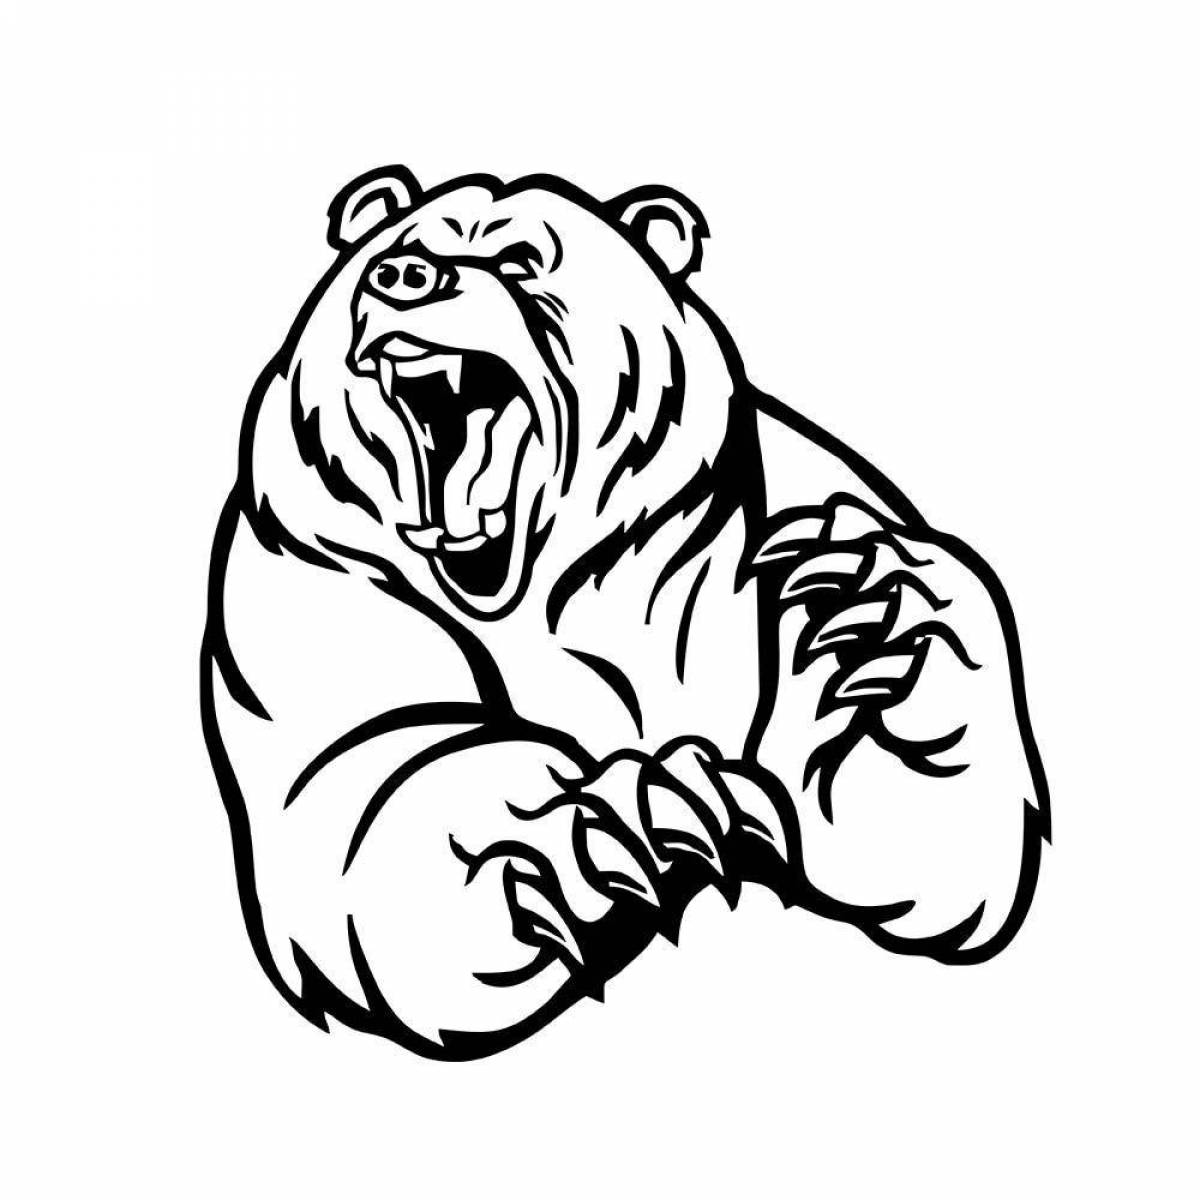 Great Russian bear coloring page